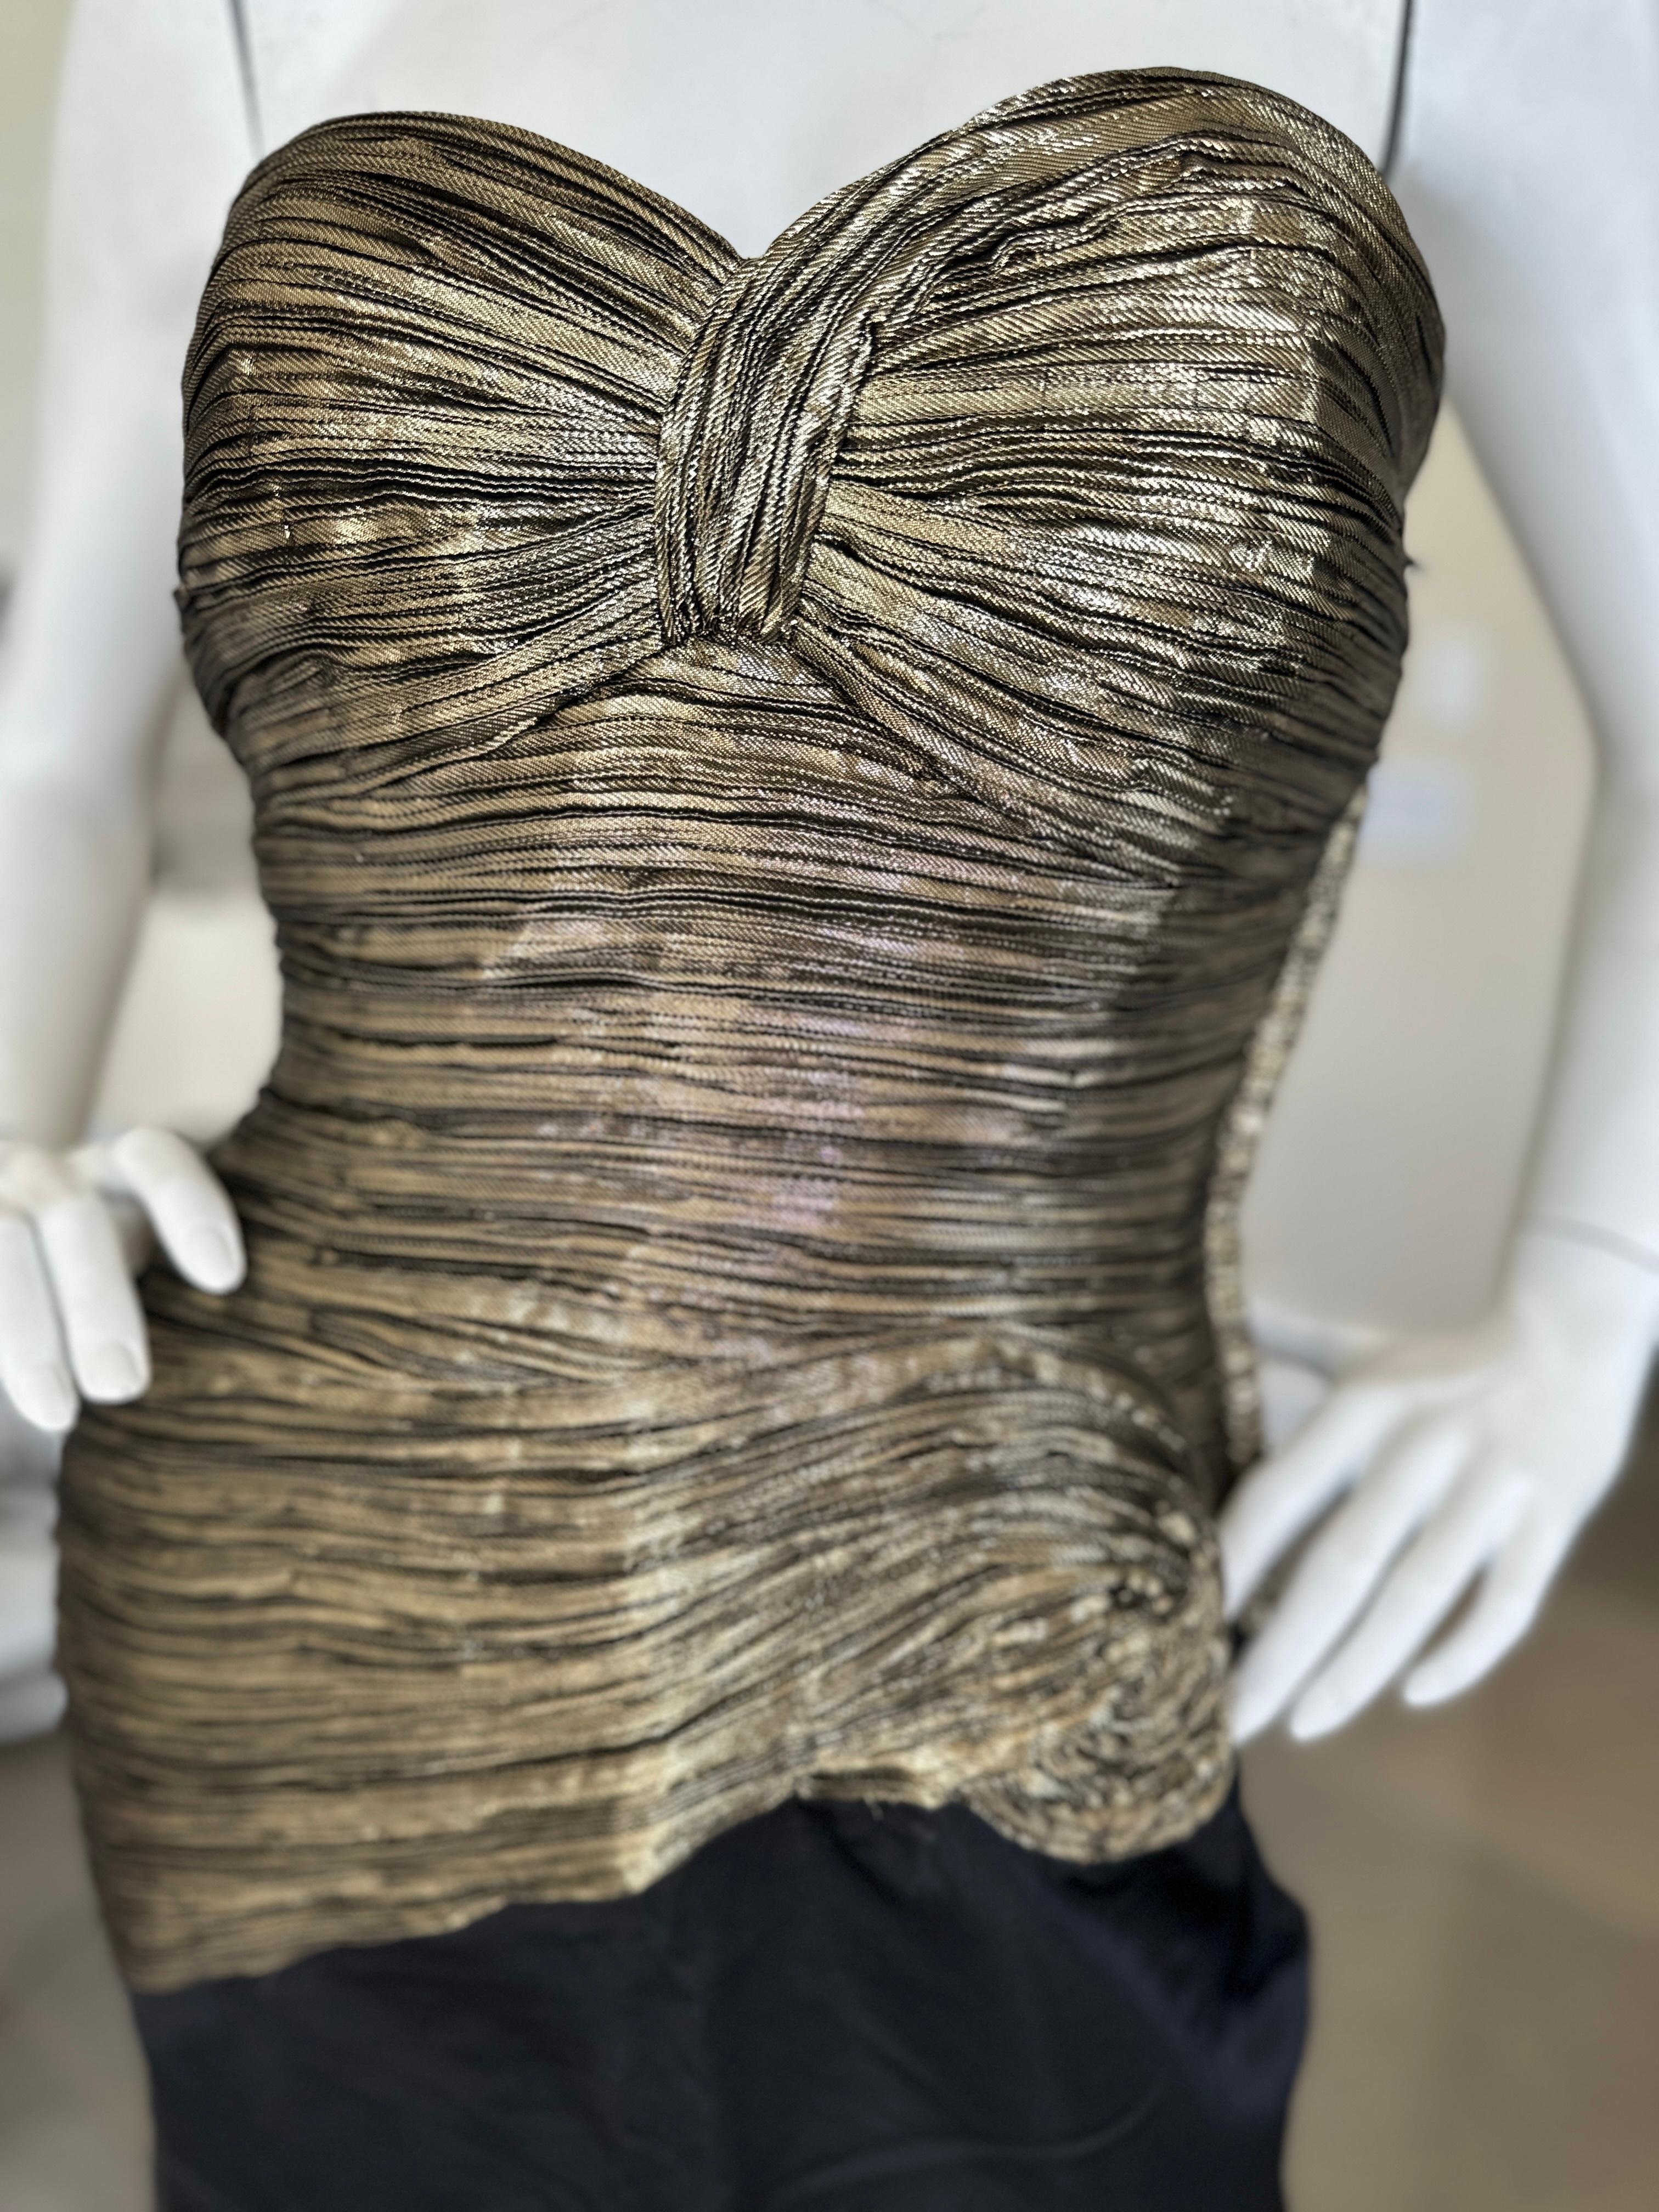 Lillie Rubin Vintage Evening  Dress with Dramatic Gold Corset and High Slit For Sale 1